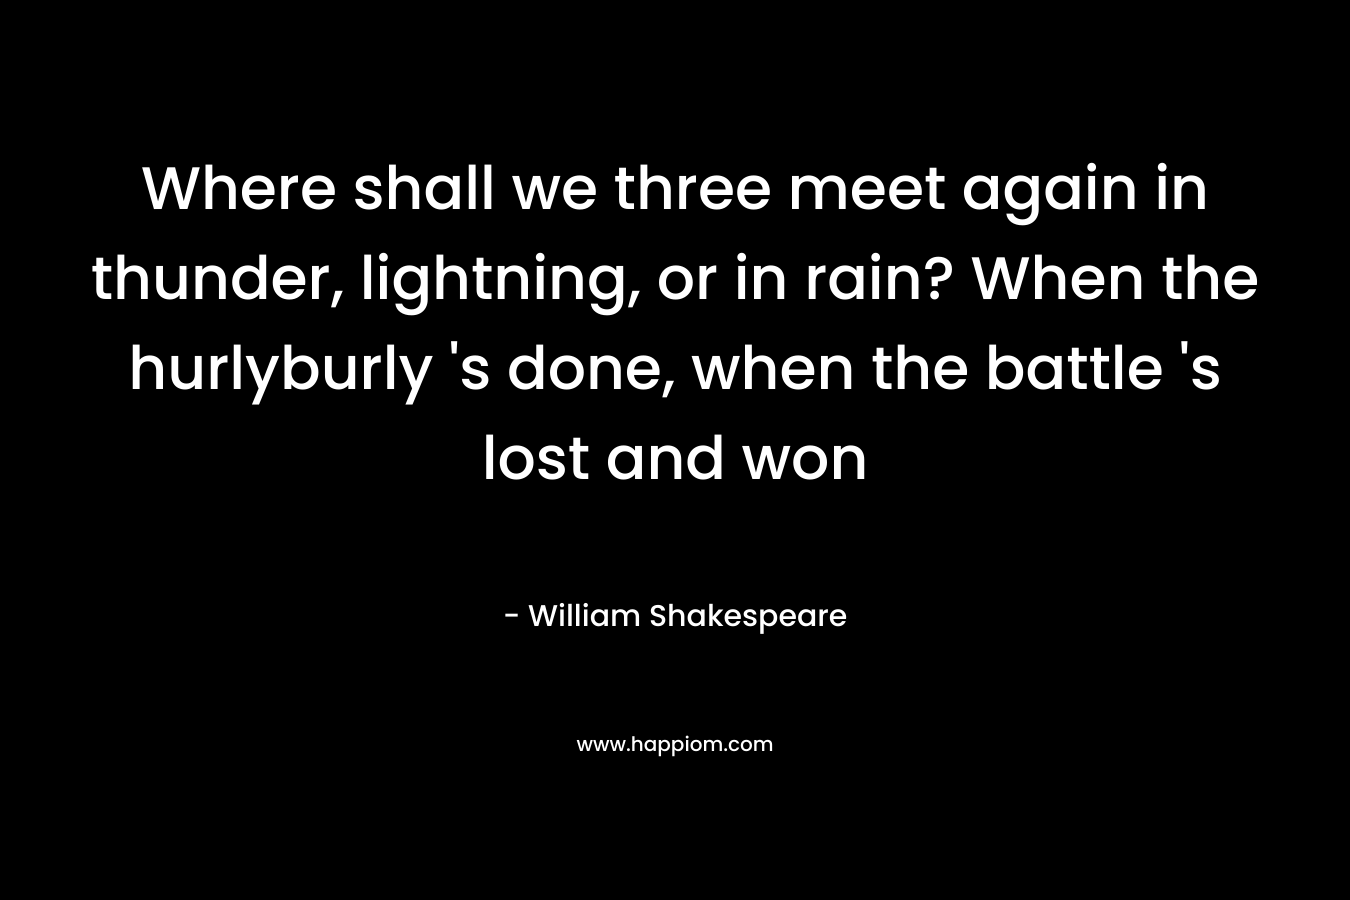 Where shall we three meet again in thunder, lightning, or in rain? When the hurlyburly 's done, when the battle 's lost and won